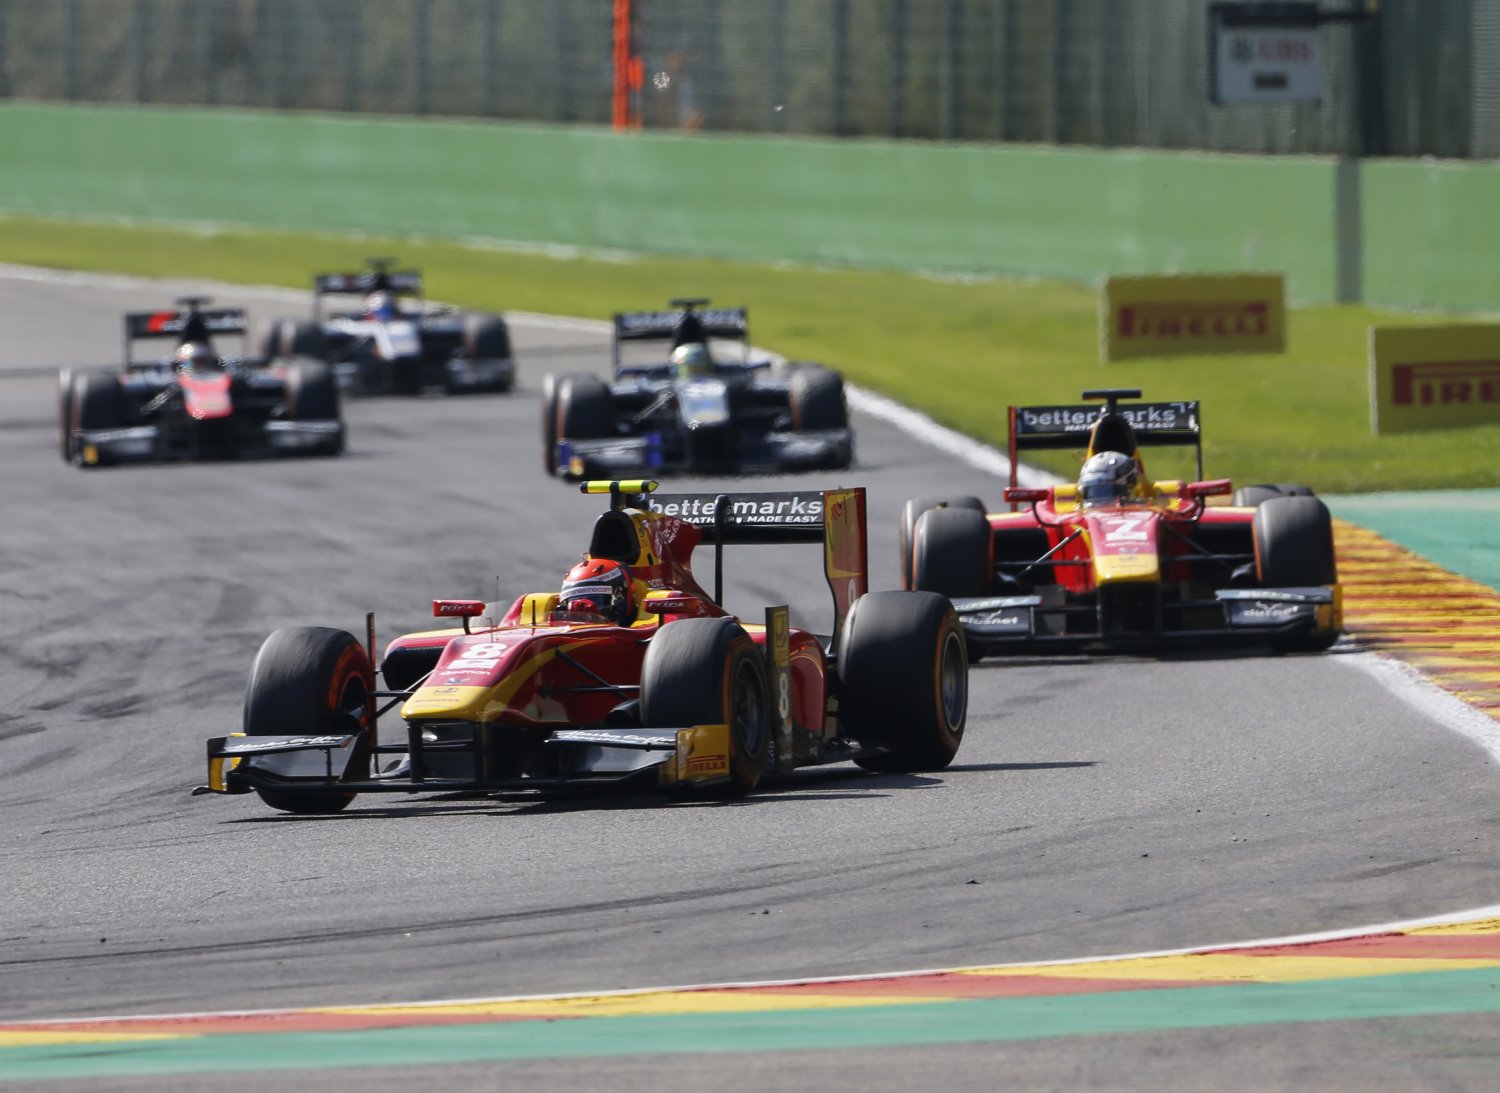 Rossi leads King at Spa in 2015